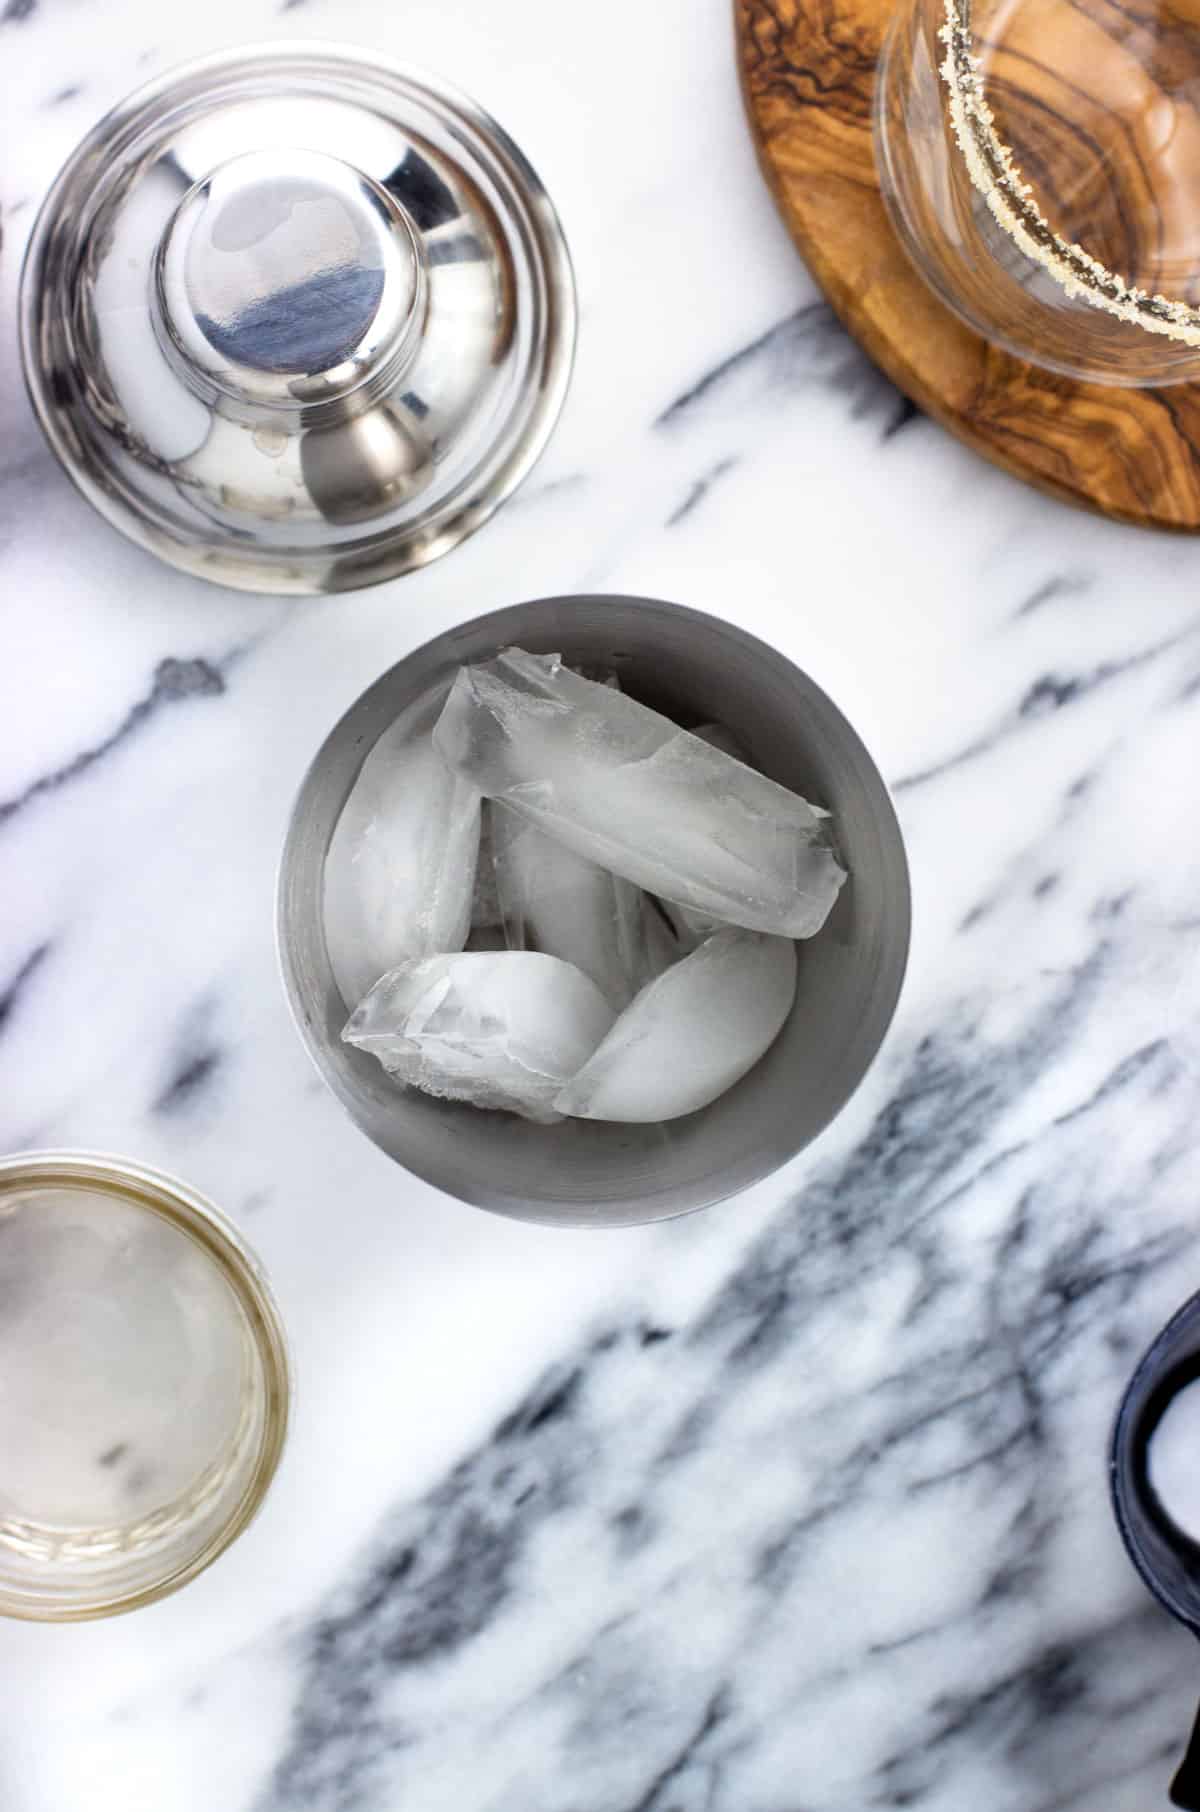 Ice cubes in a metal cocktail shaker.